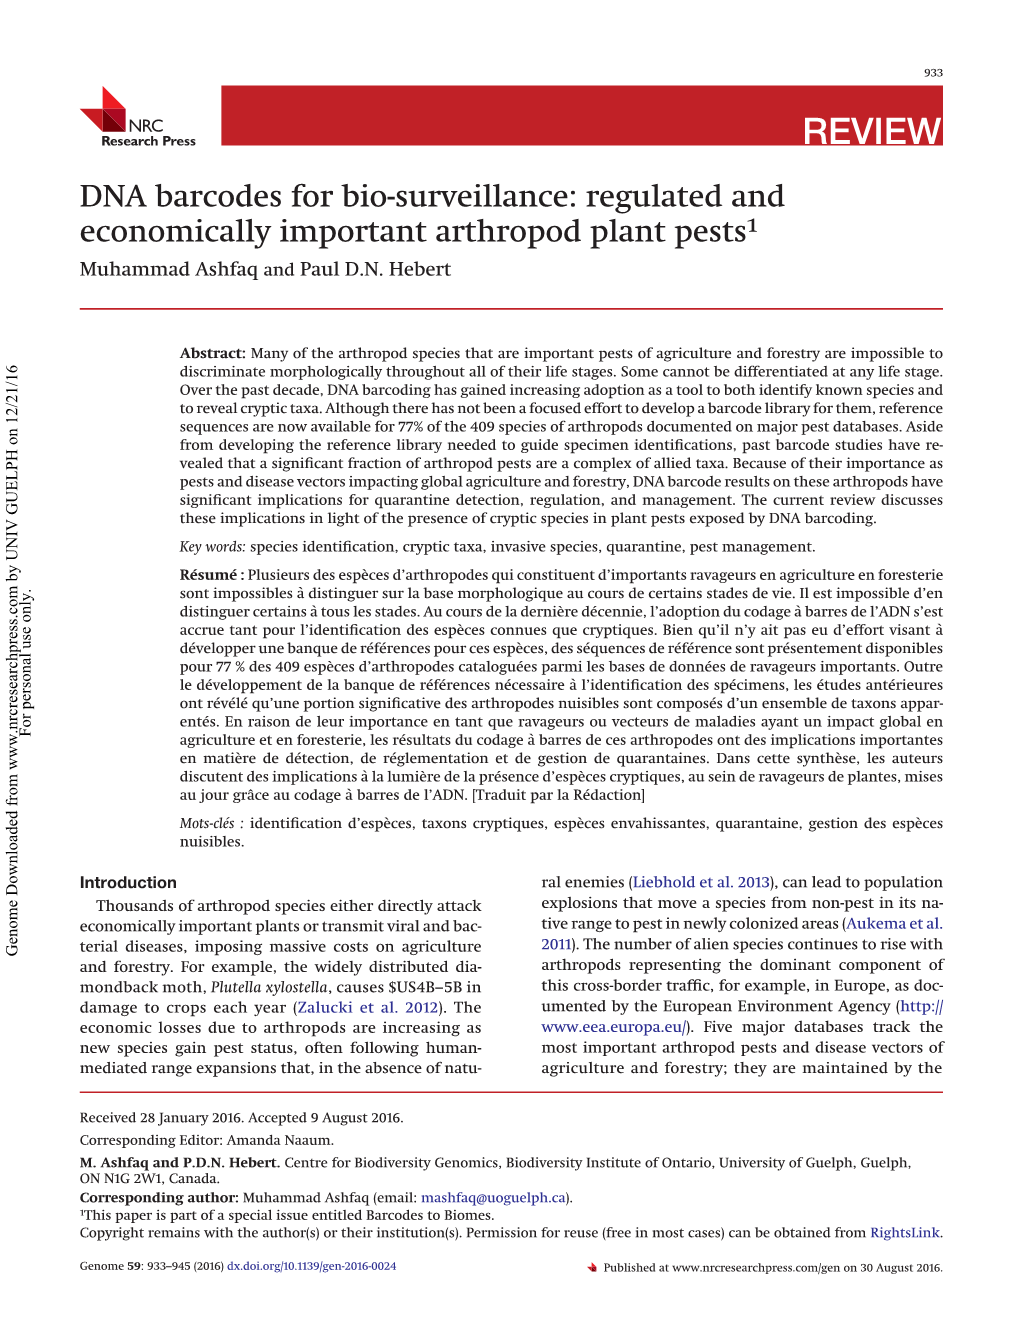 DNA Barcodes for Bio-Surveillance: Regulated and Economically Important Arthropod Plant Pests1 Muhammad Ashfaq and Paul D.N